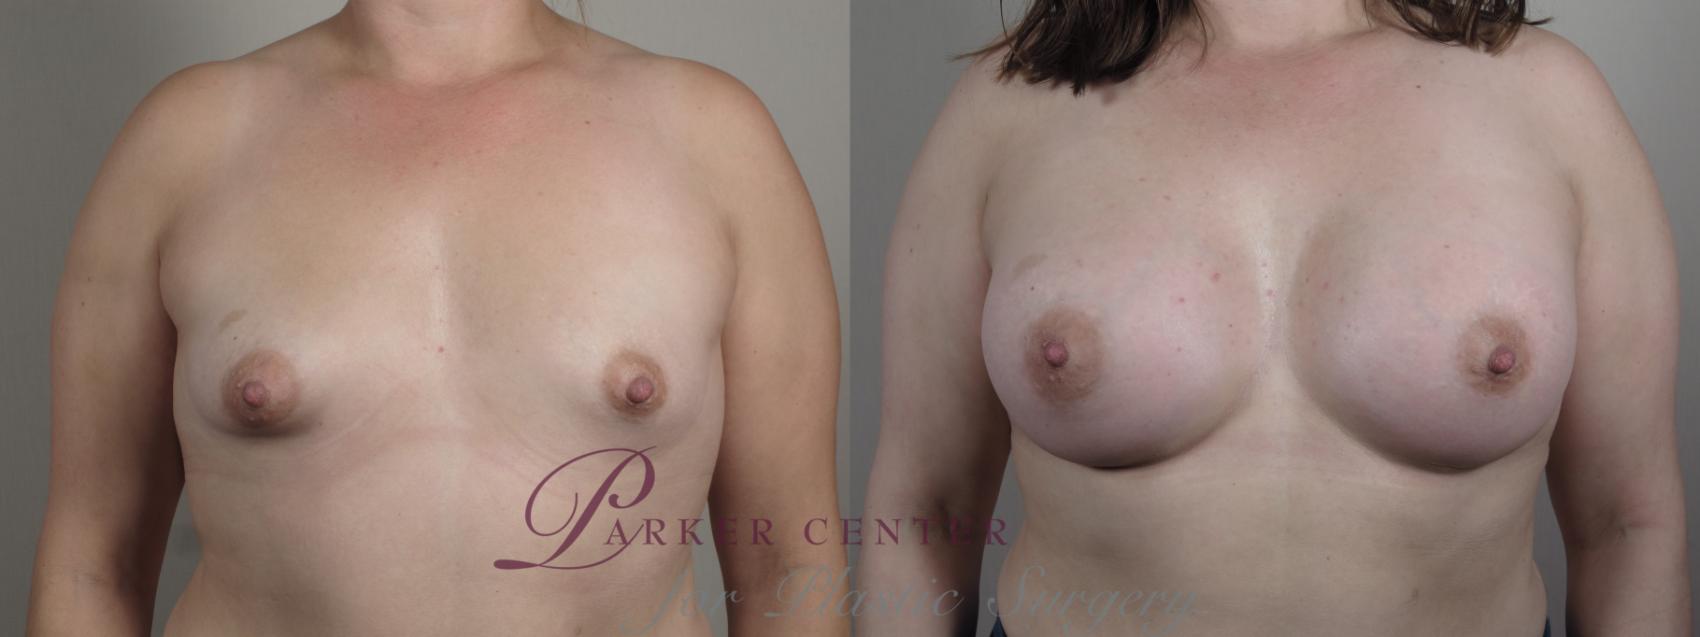 Breast Asymmetry Case 1008 Before & After Front | Paramus, NJ | Parker Center for Plastic Surgery